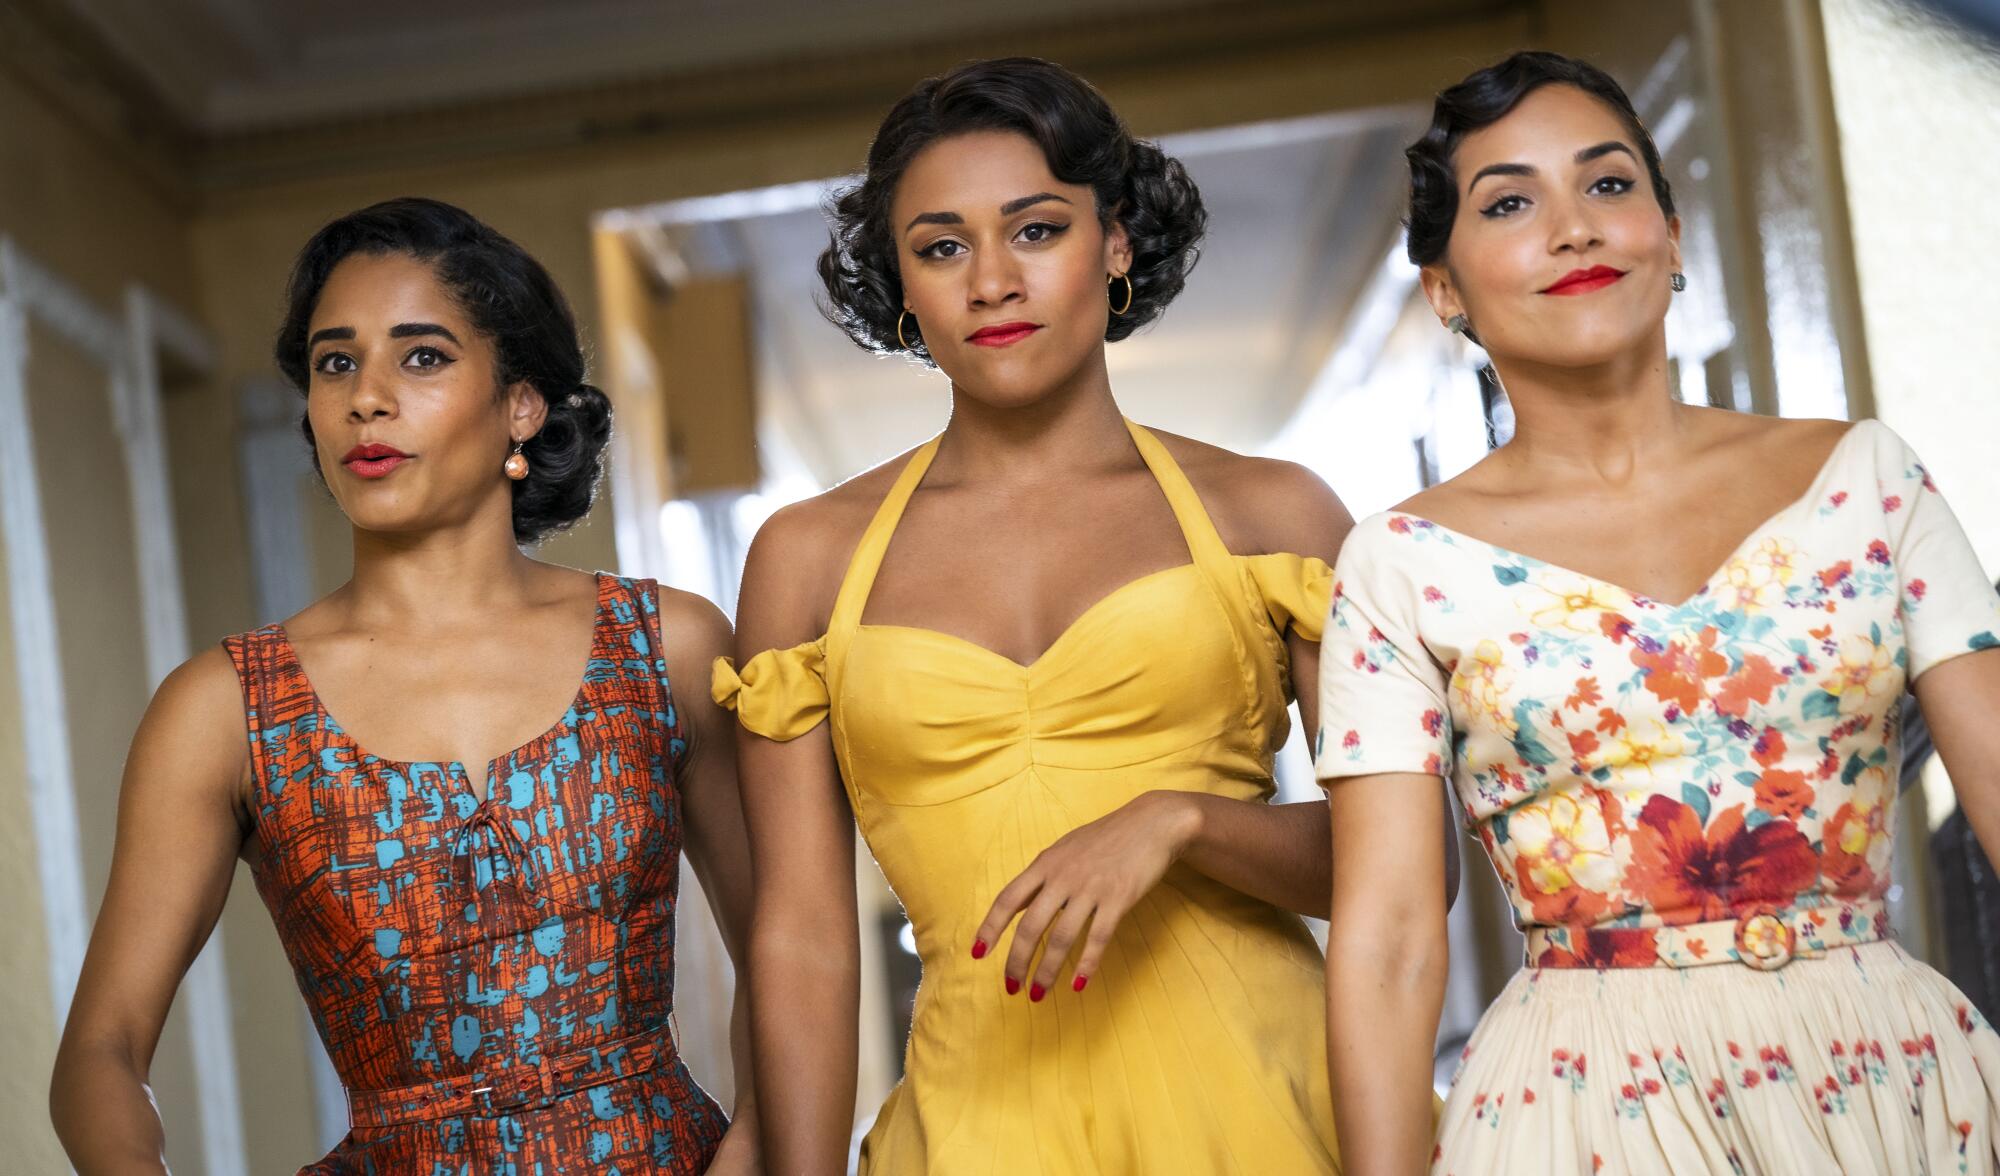 Ilda Mason as Luz, from left, Ariana DeBose as Anita, and Ana Isabelle as Rosalia in  "West Side Story."